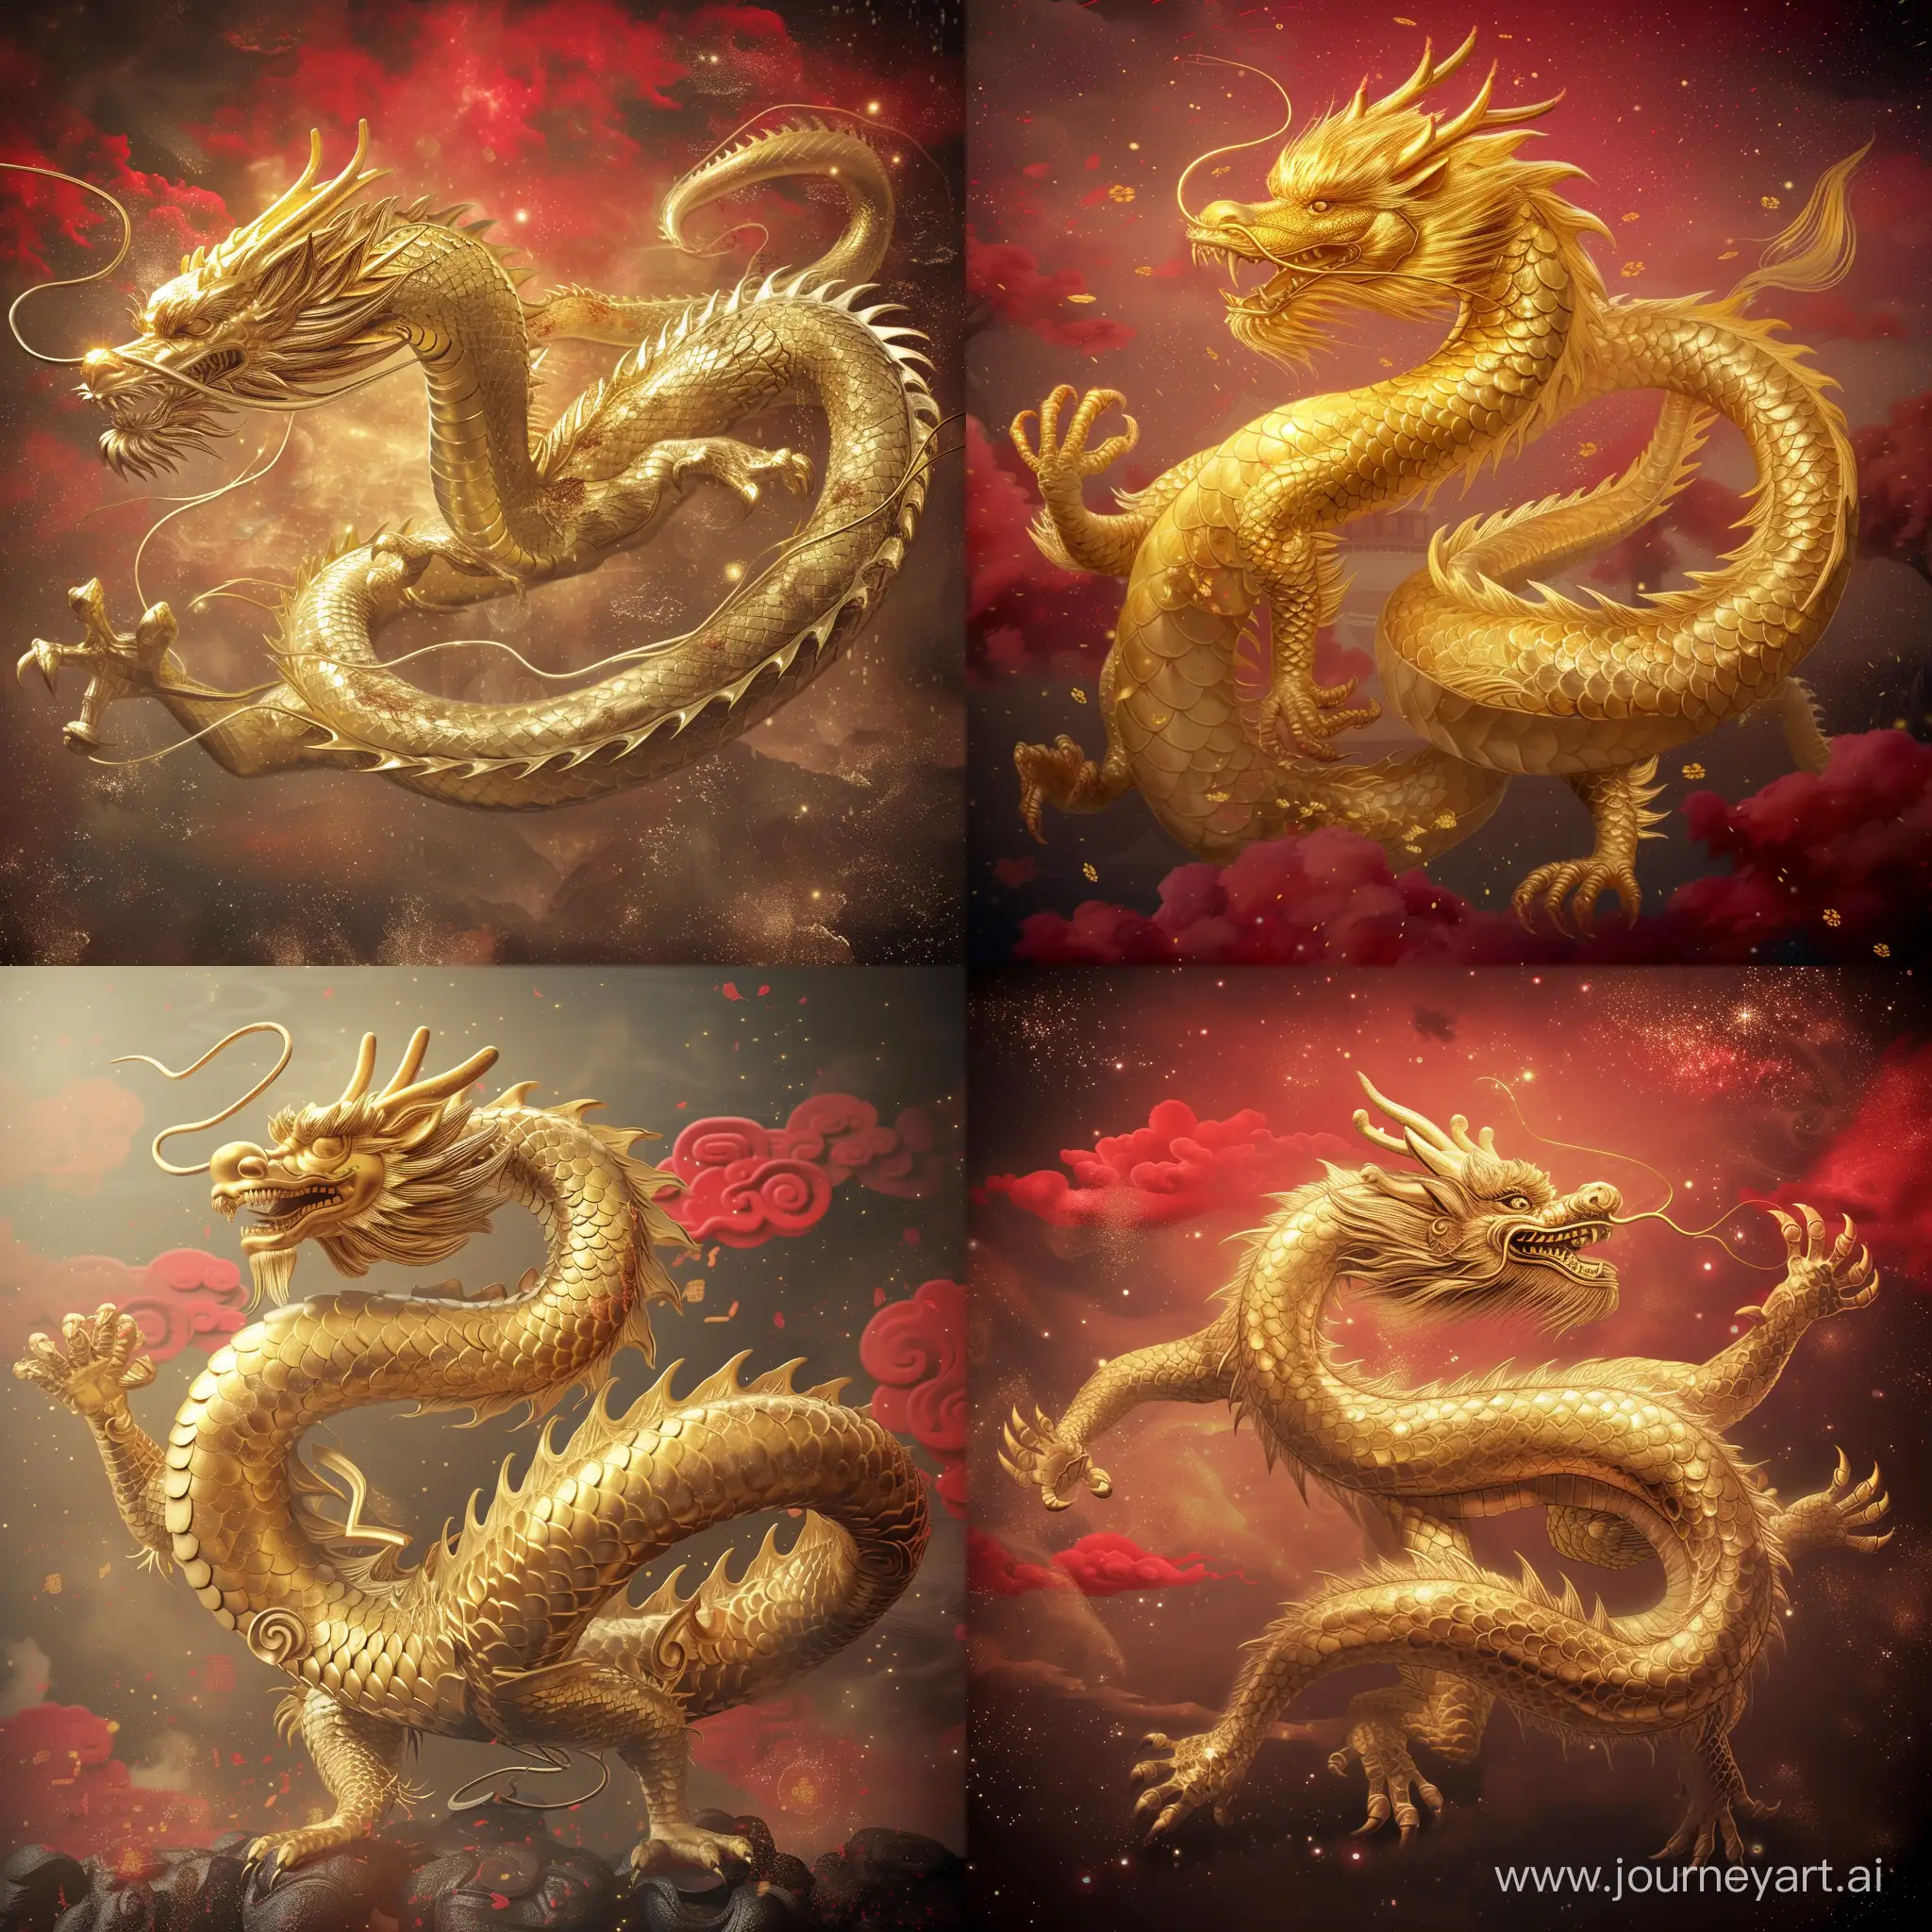 Majestic-Golden-Dragon-with-Five-Claws-Celebrating-the-New-Year